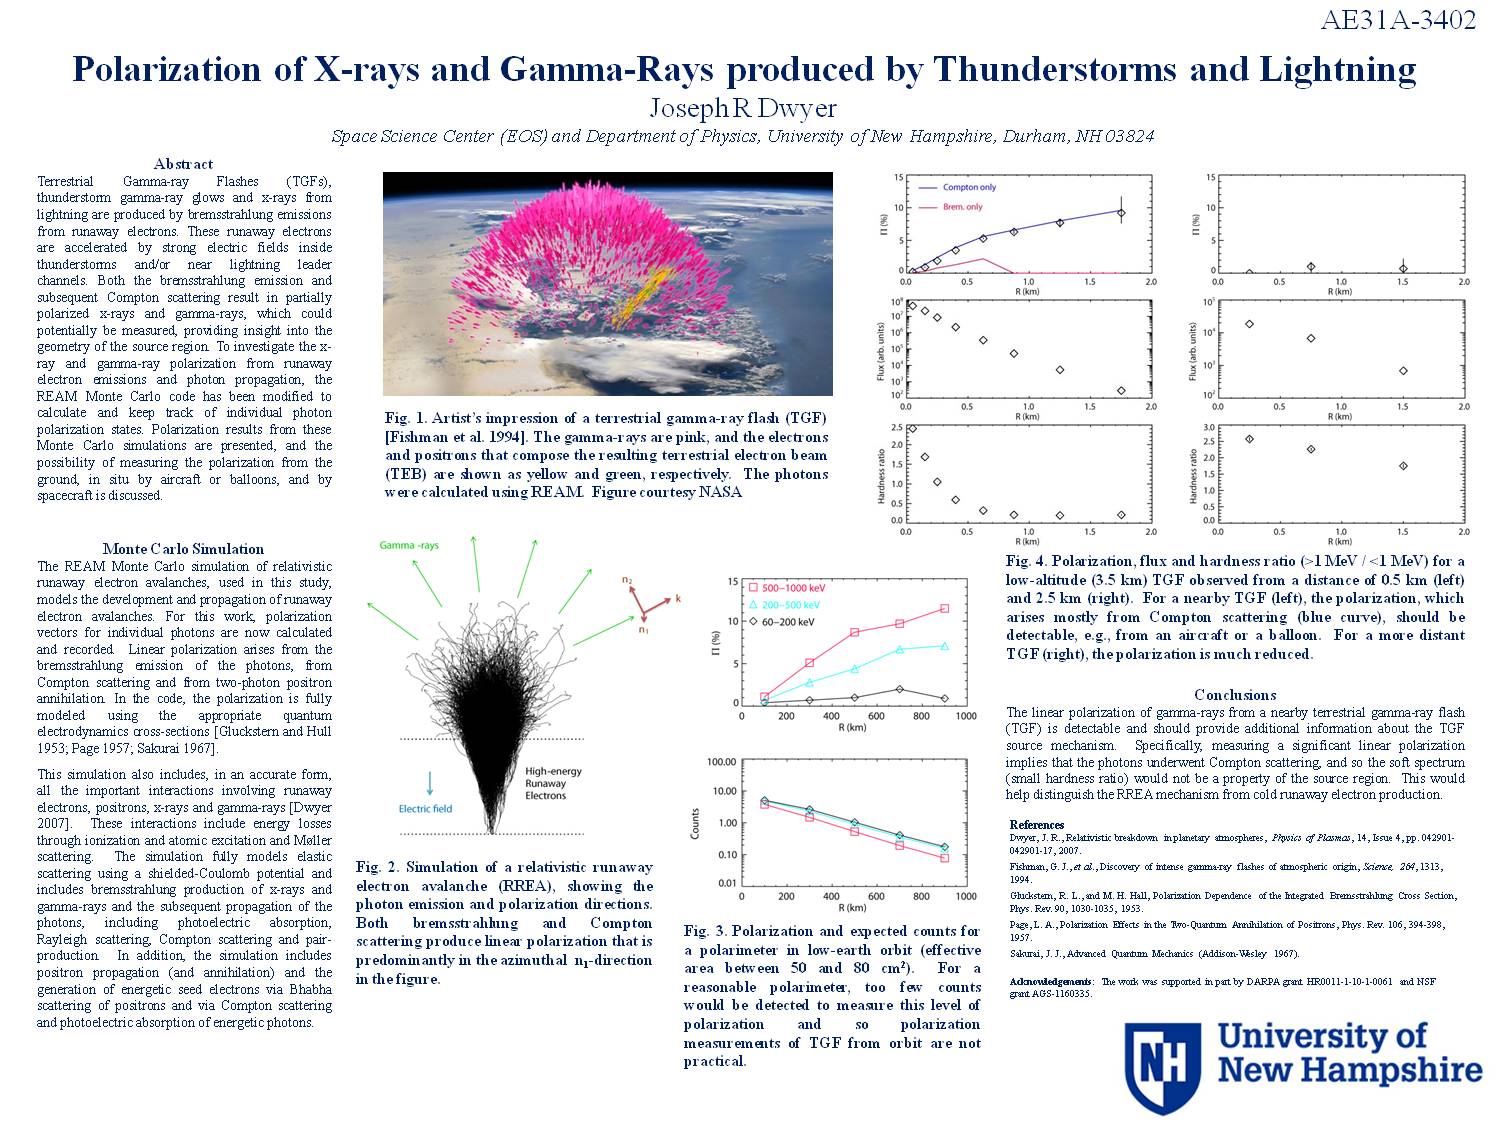 Polarization Of X-Rays And Gamma-Rays Produced By Thunderstorms And Lightning by jrd1002